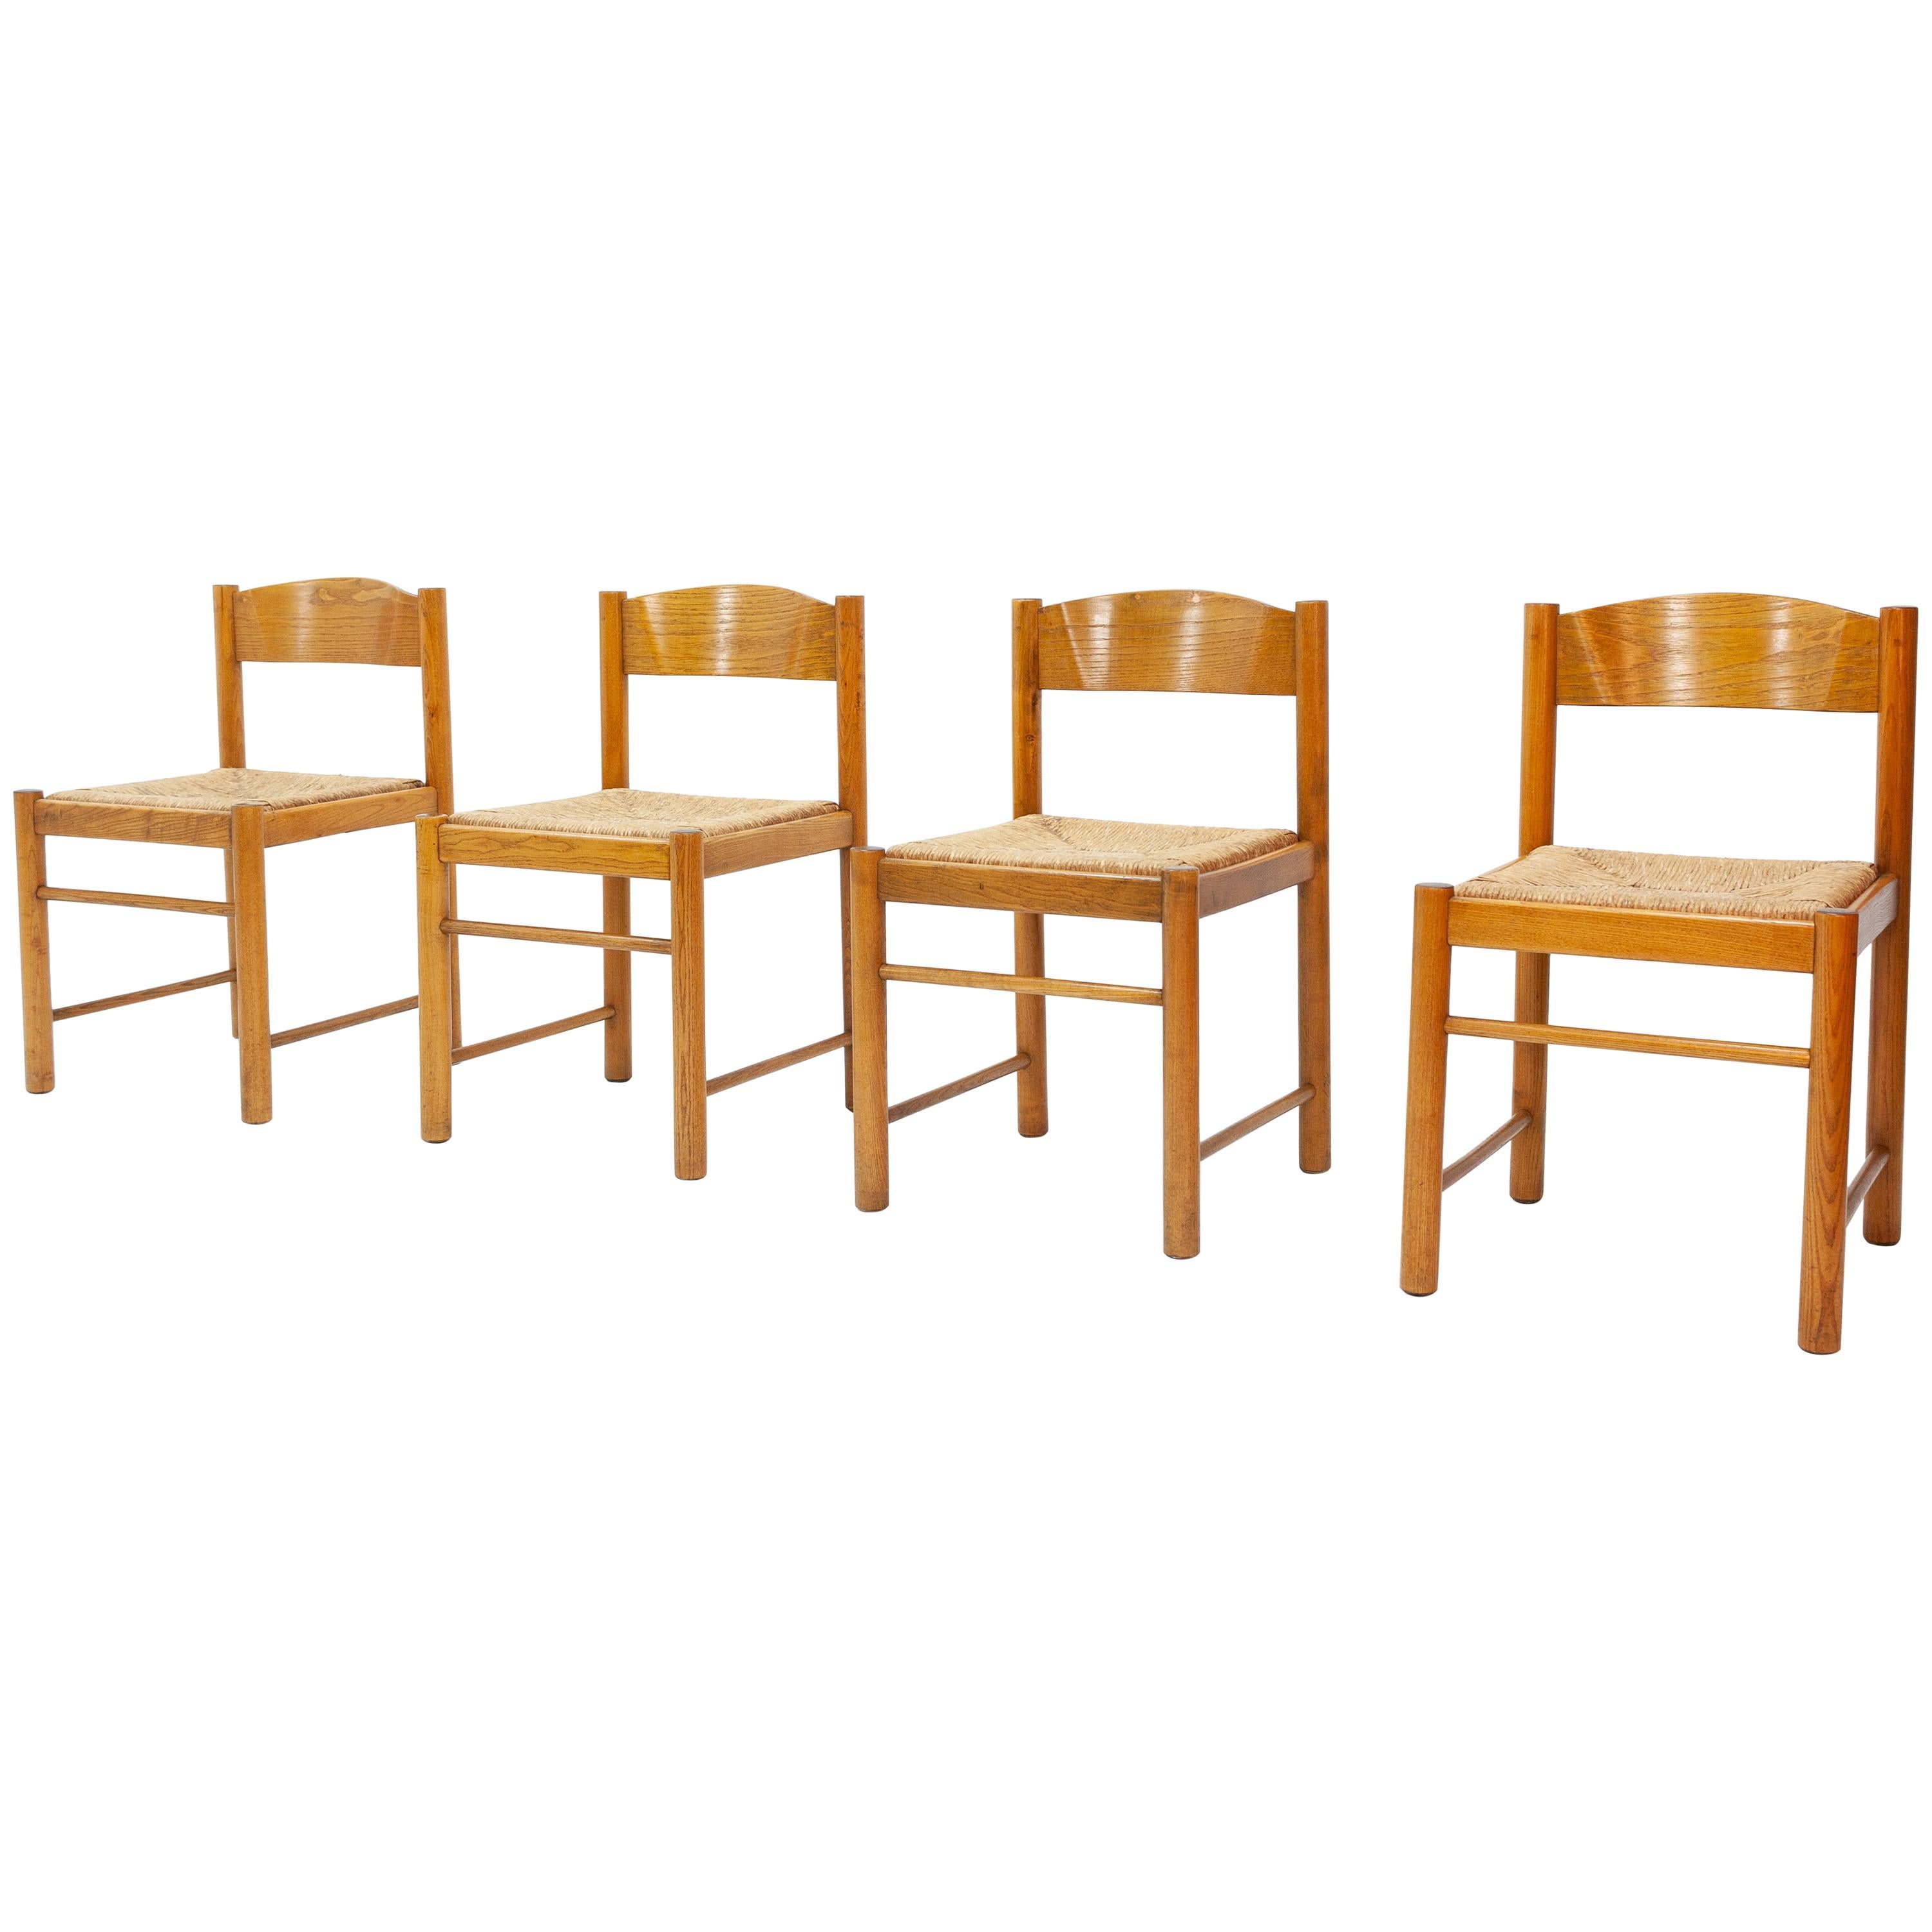 Four Solid Ash and Rattan Chairs in the Style of Charlotte Perriand at ...